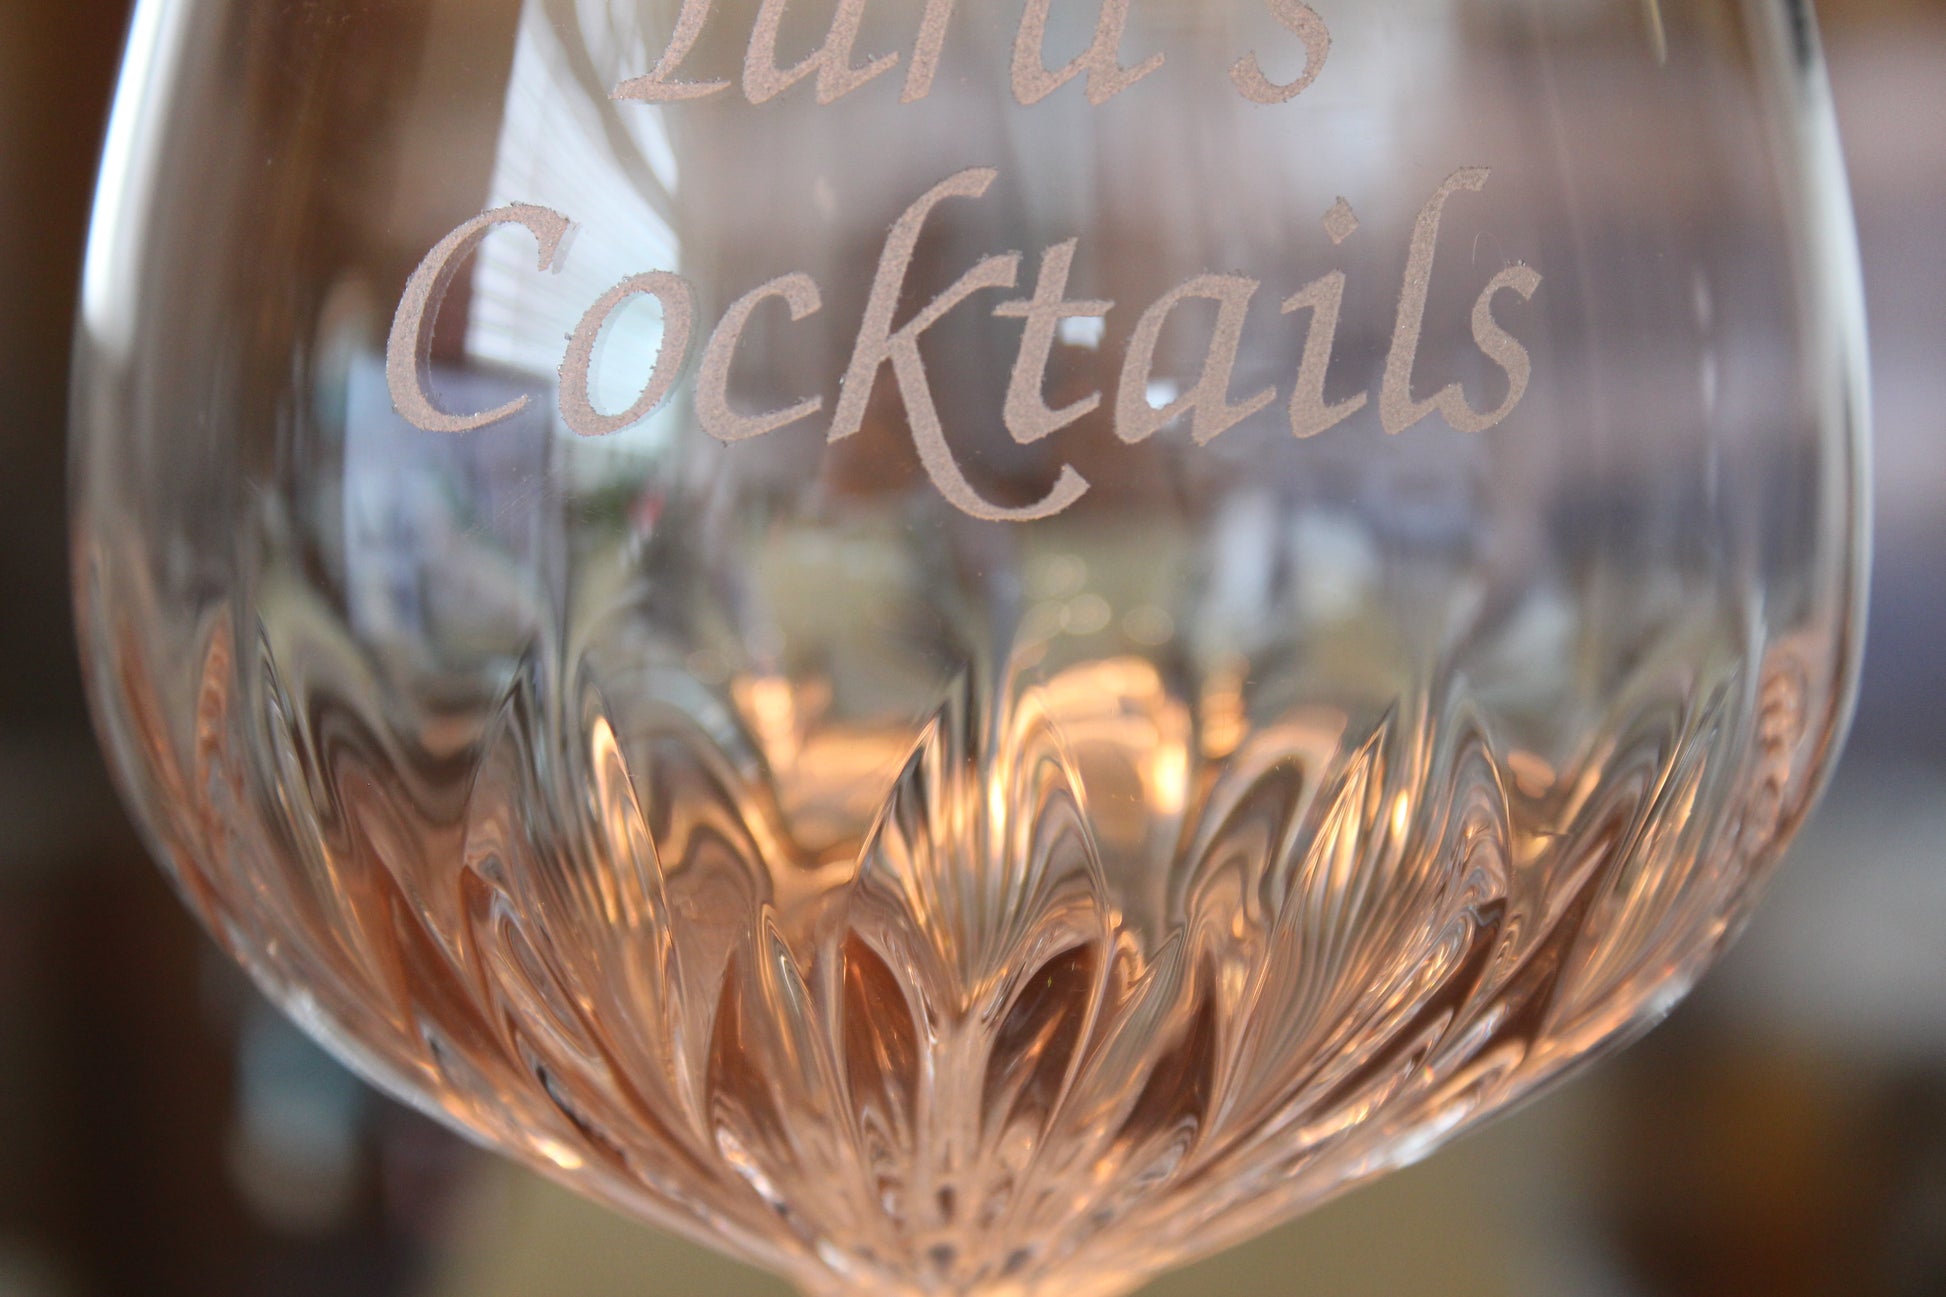 A personalised gin glass that shows the crystal cut details.